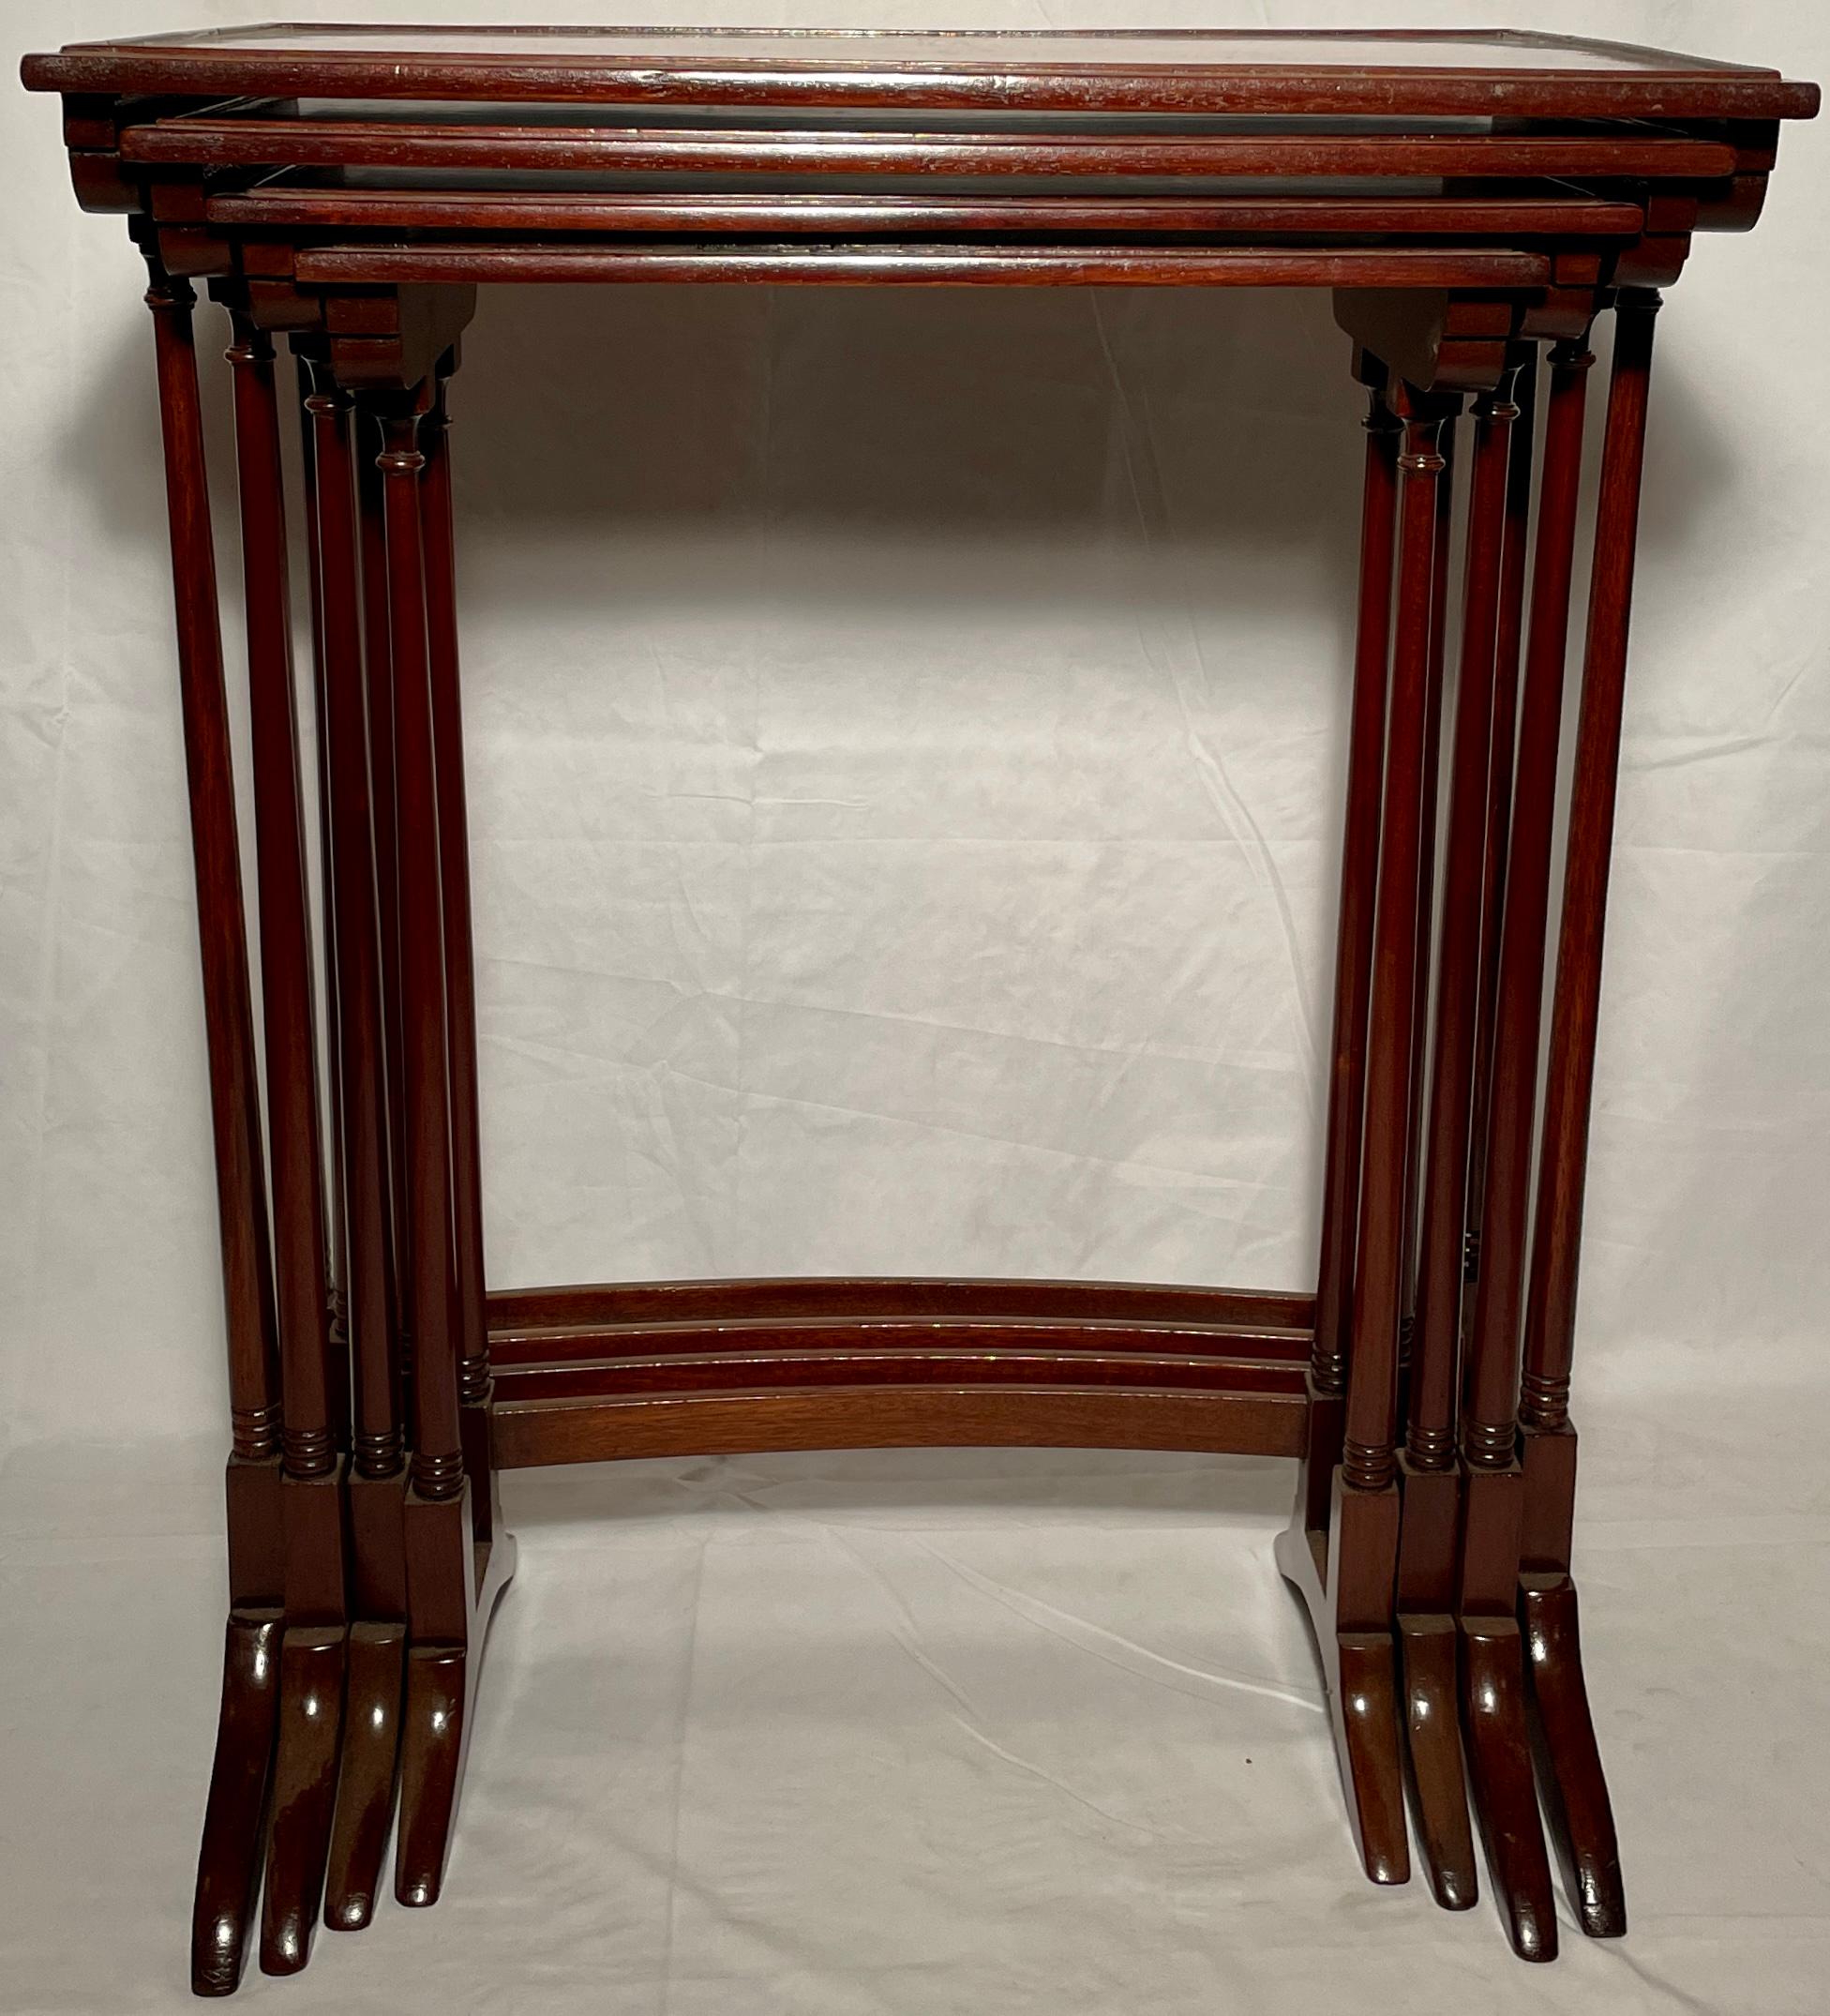 19th Century Antique English Mahogany and Satinwood Inlaid Nest of Tables, circa 1880 For Sale